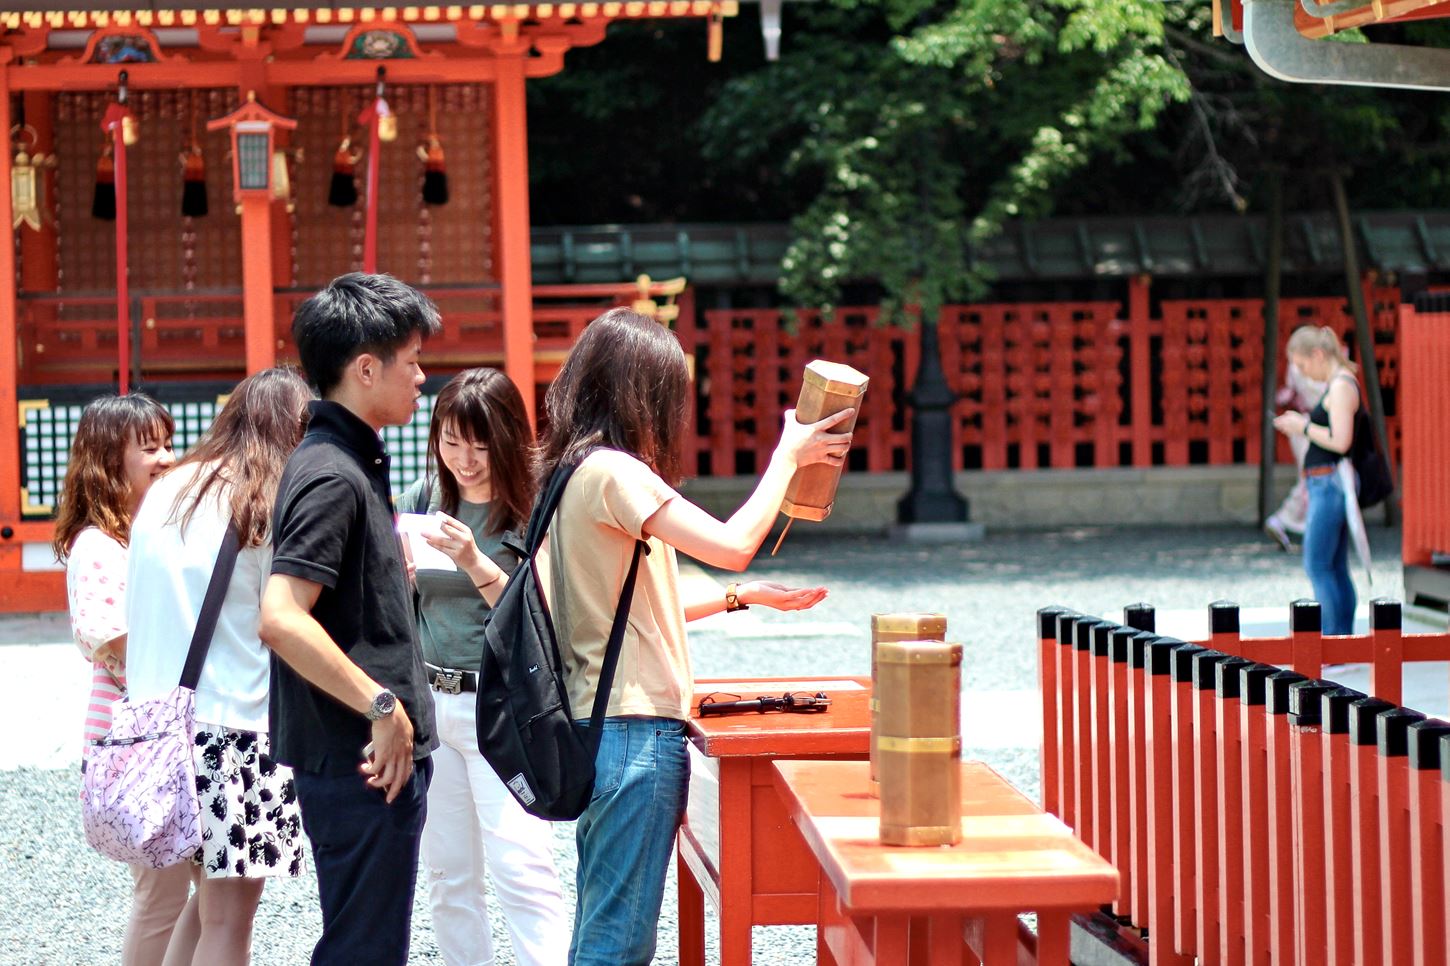 Sightseeing scenery that simply shows the weather in Kyoto in June4